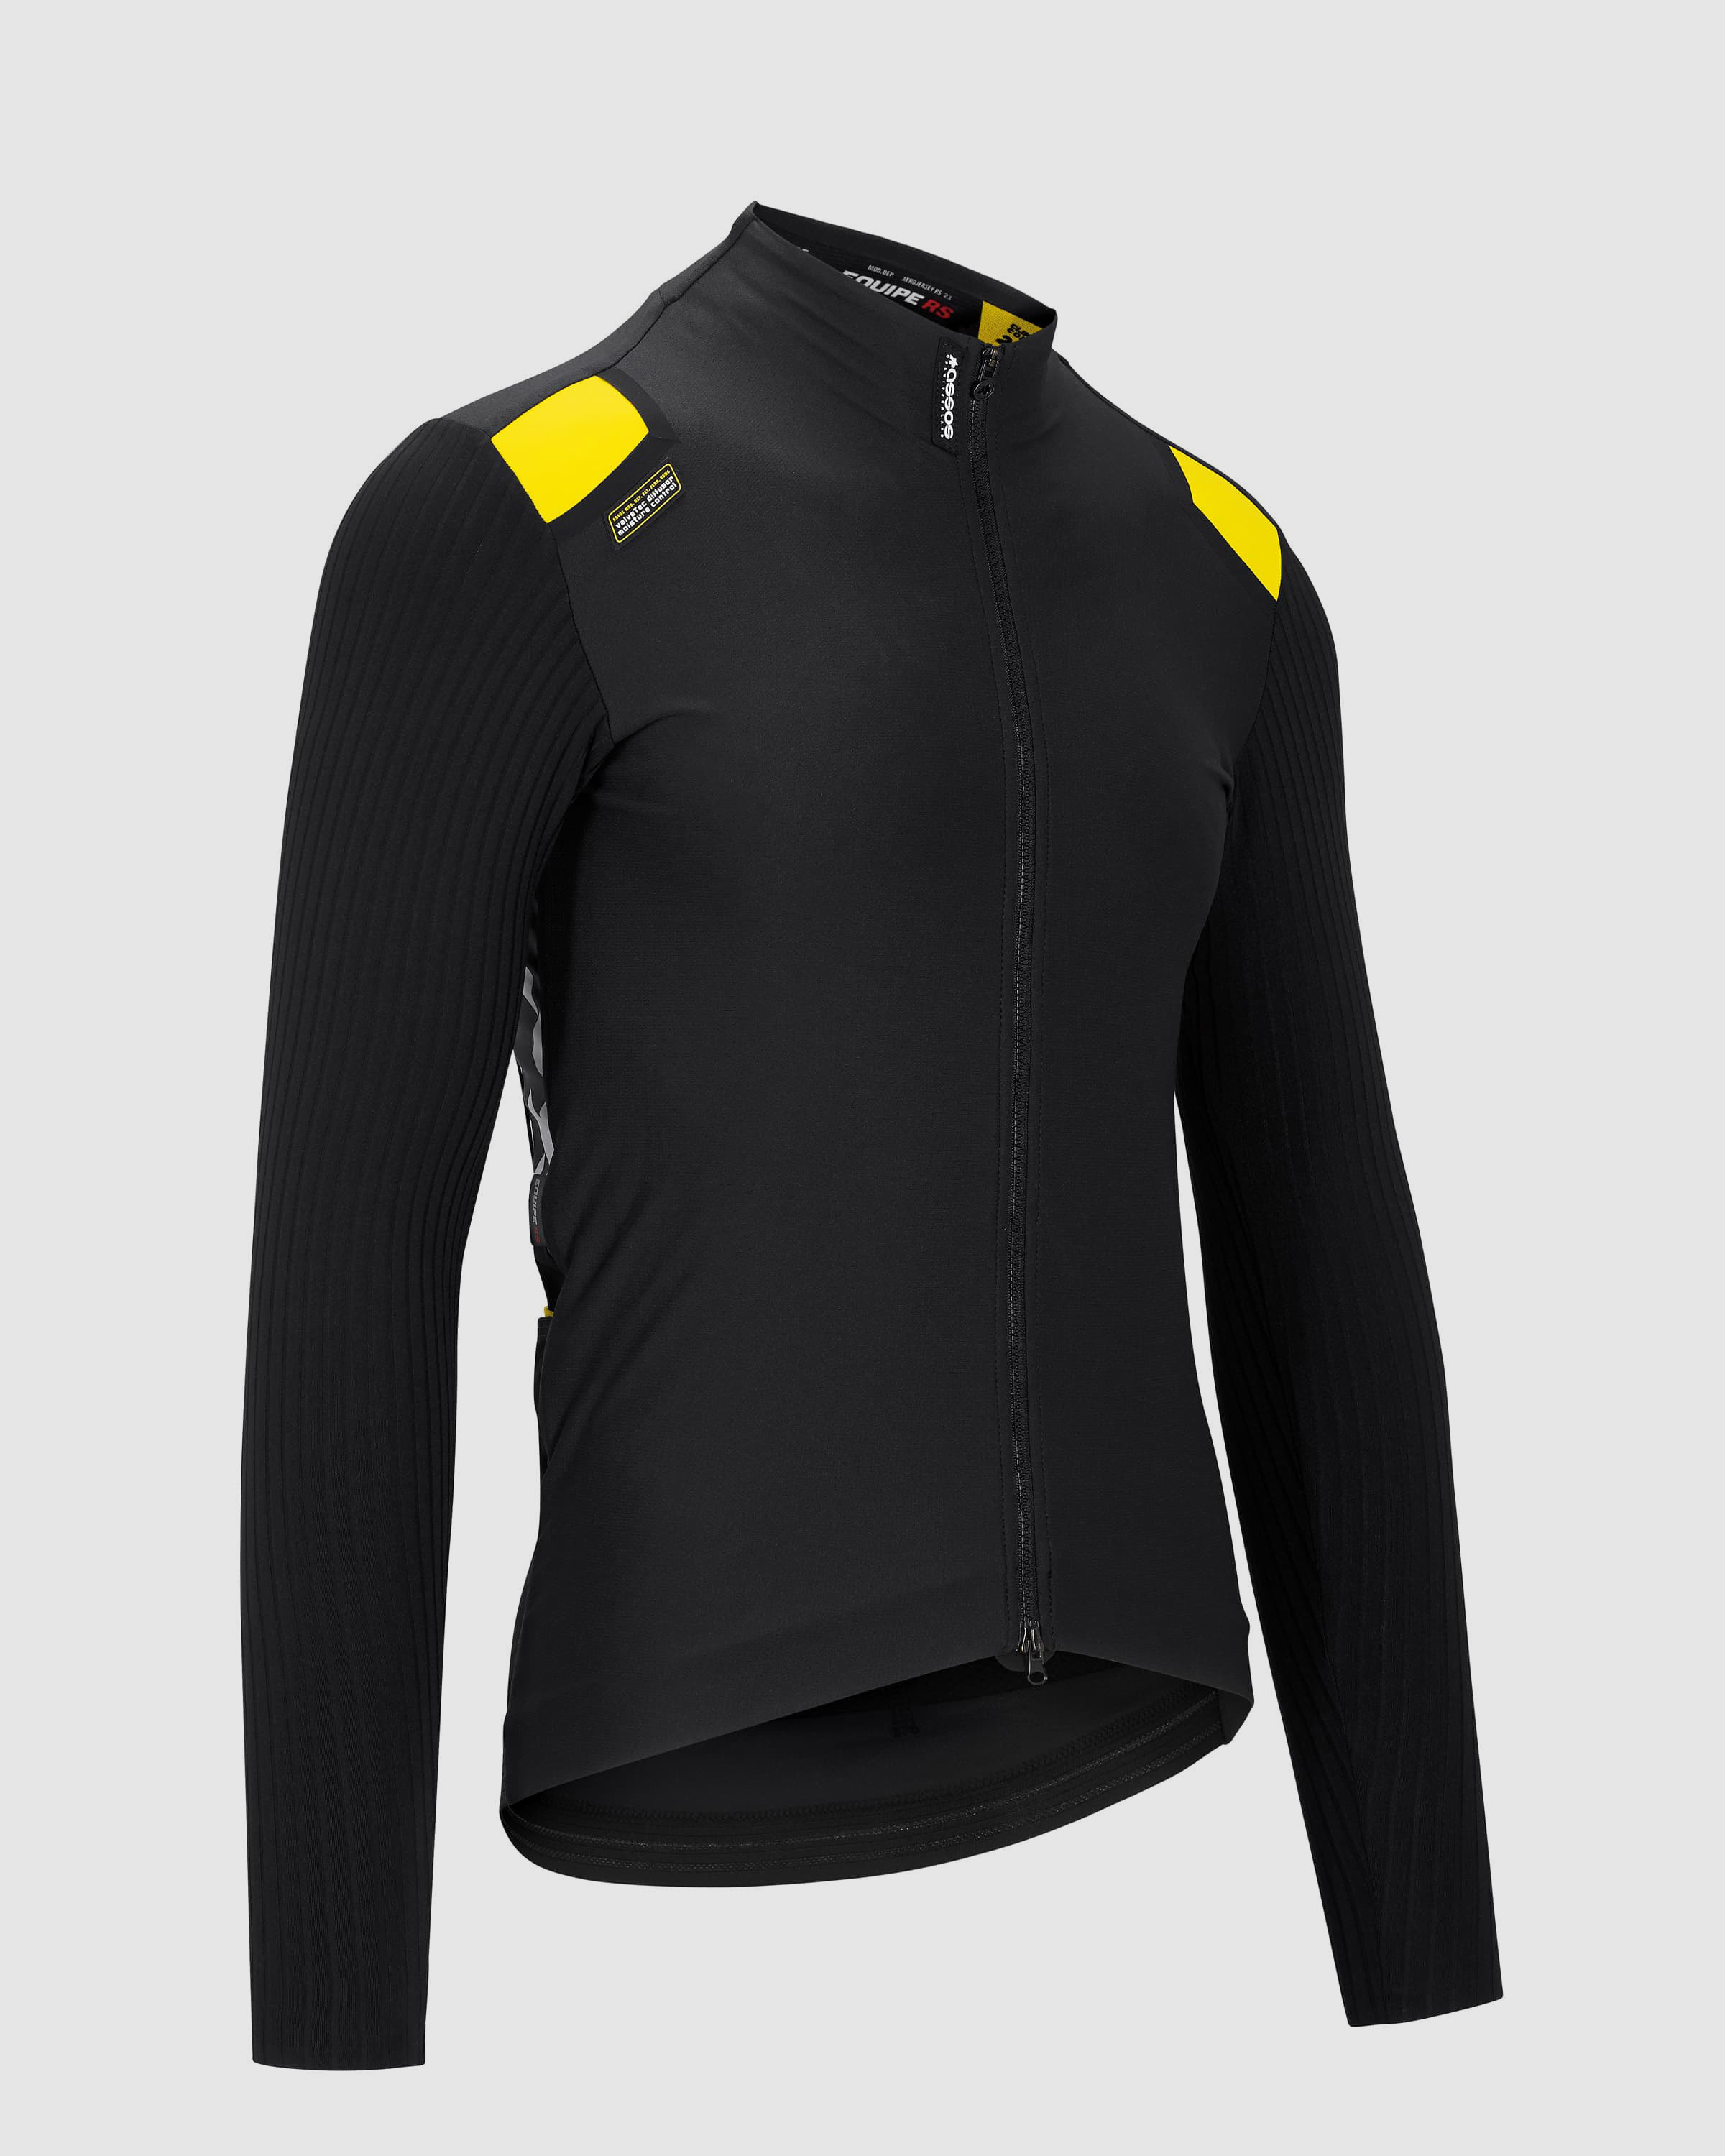 EQUIPE RS Spring Fall Jacket - ASSOS Of Switzerland - Official Outlet